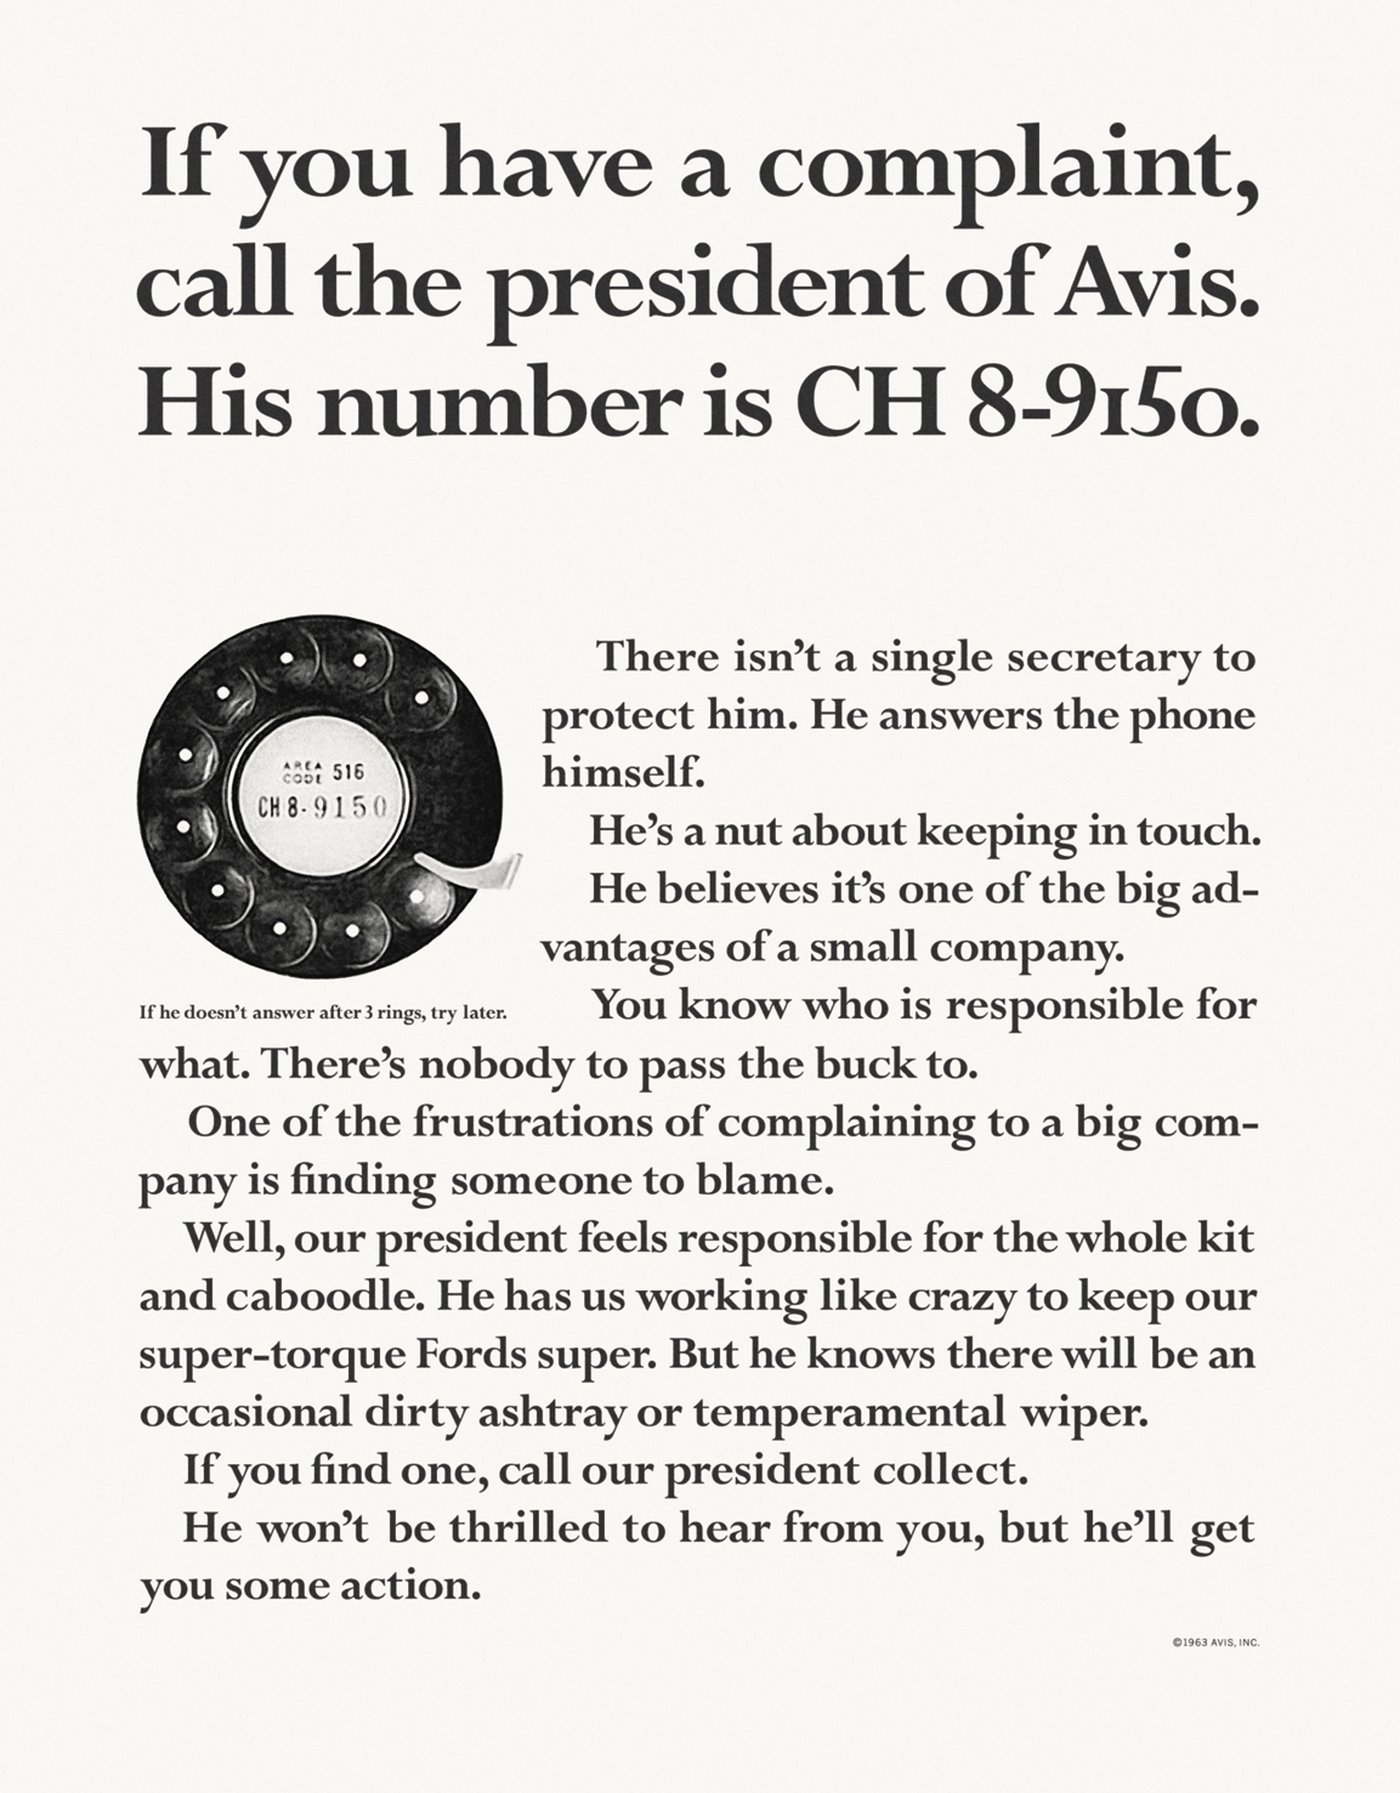 avis commitment to customer service - presidents phone number